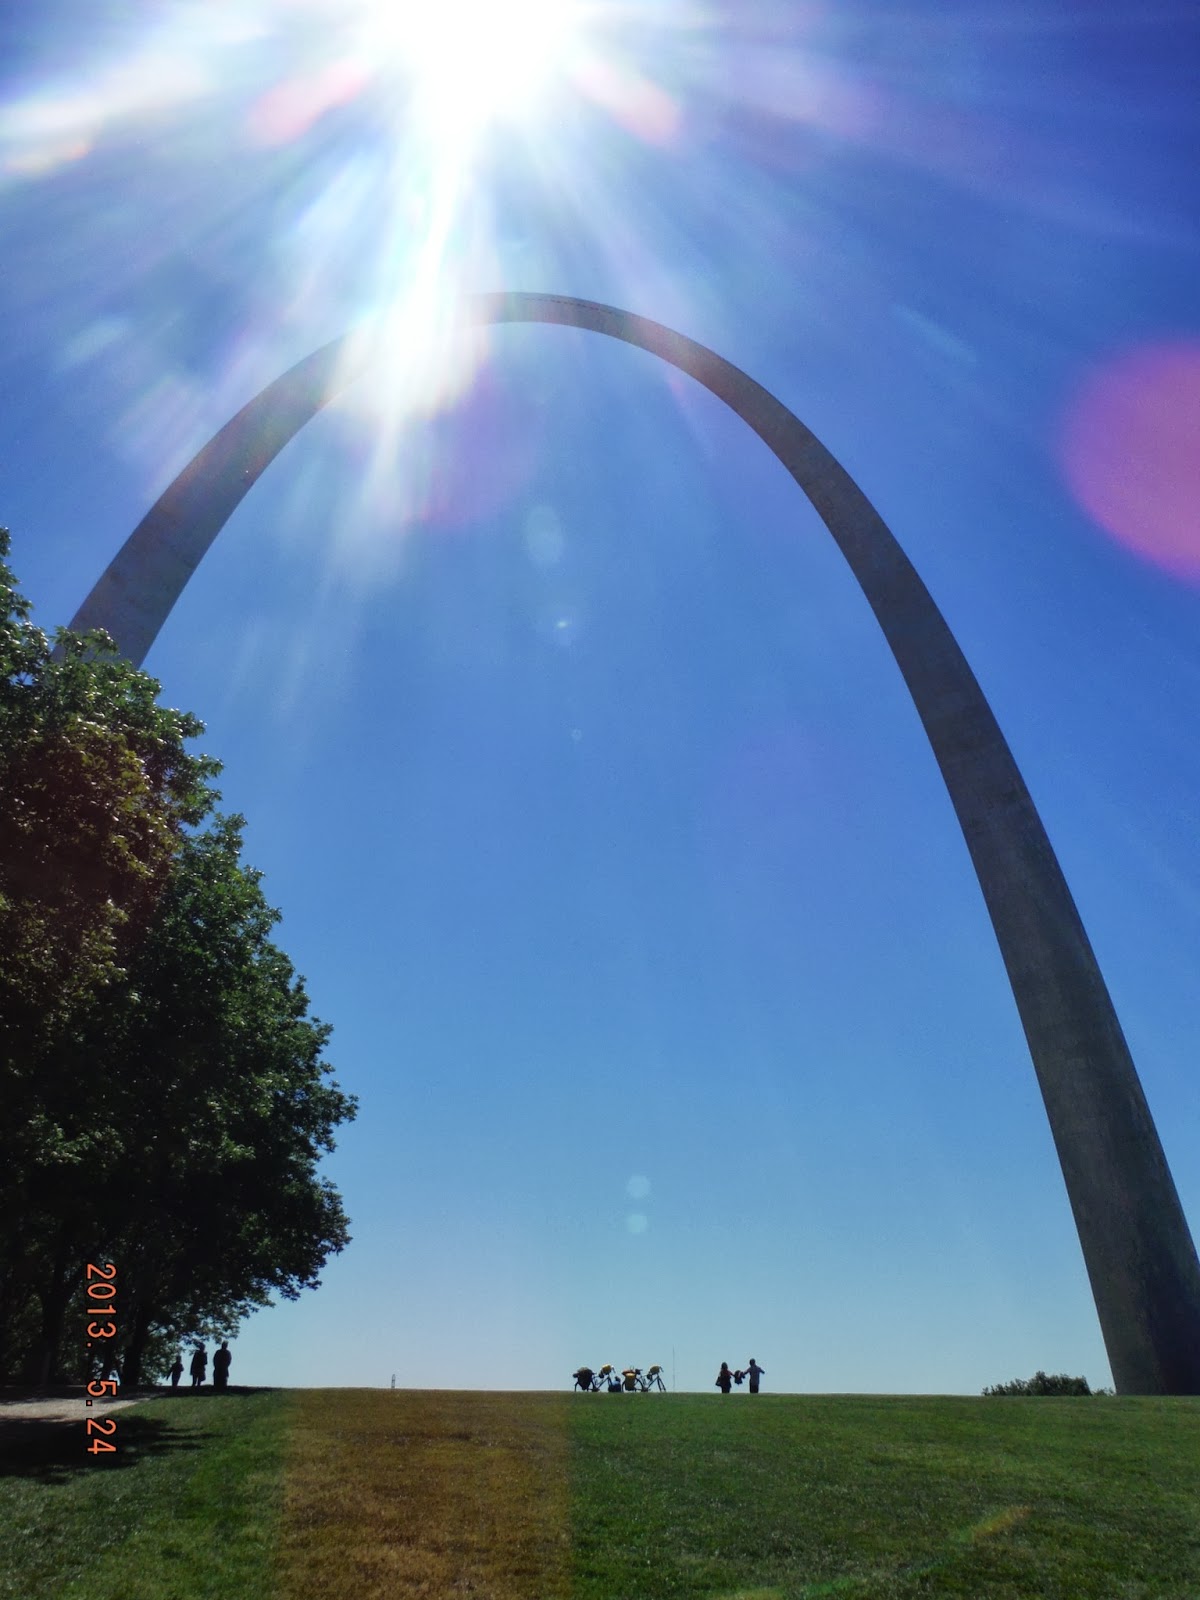 Mississippi River Trail 2013: Meet Me in St. Louis